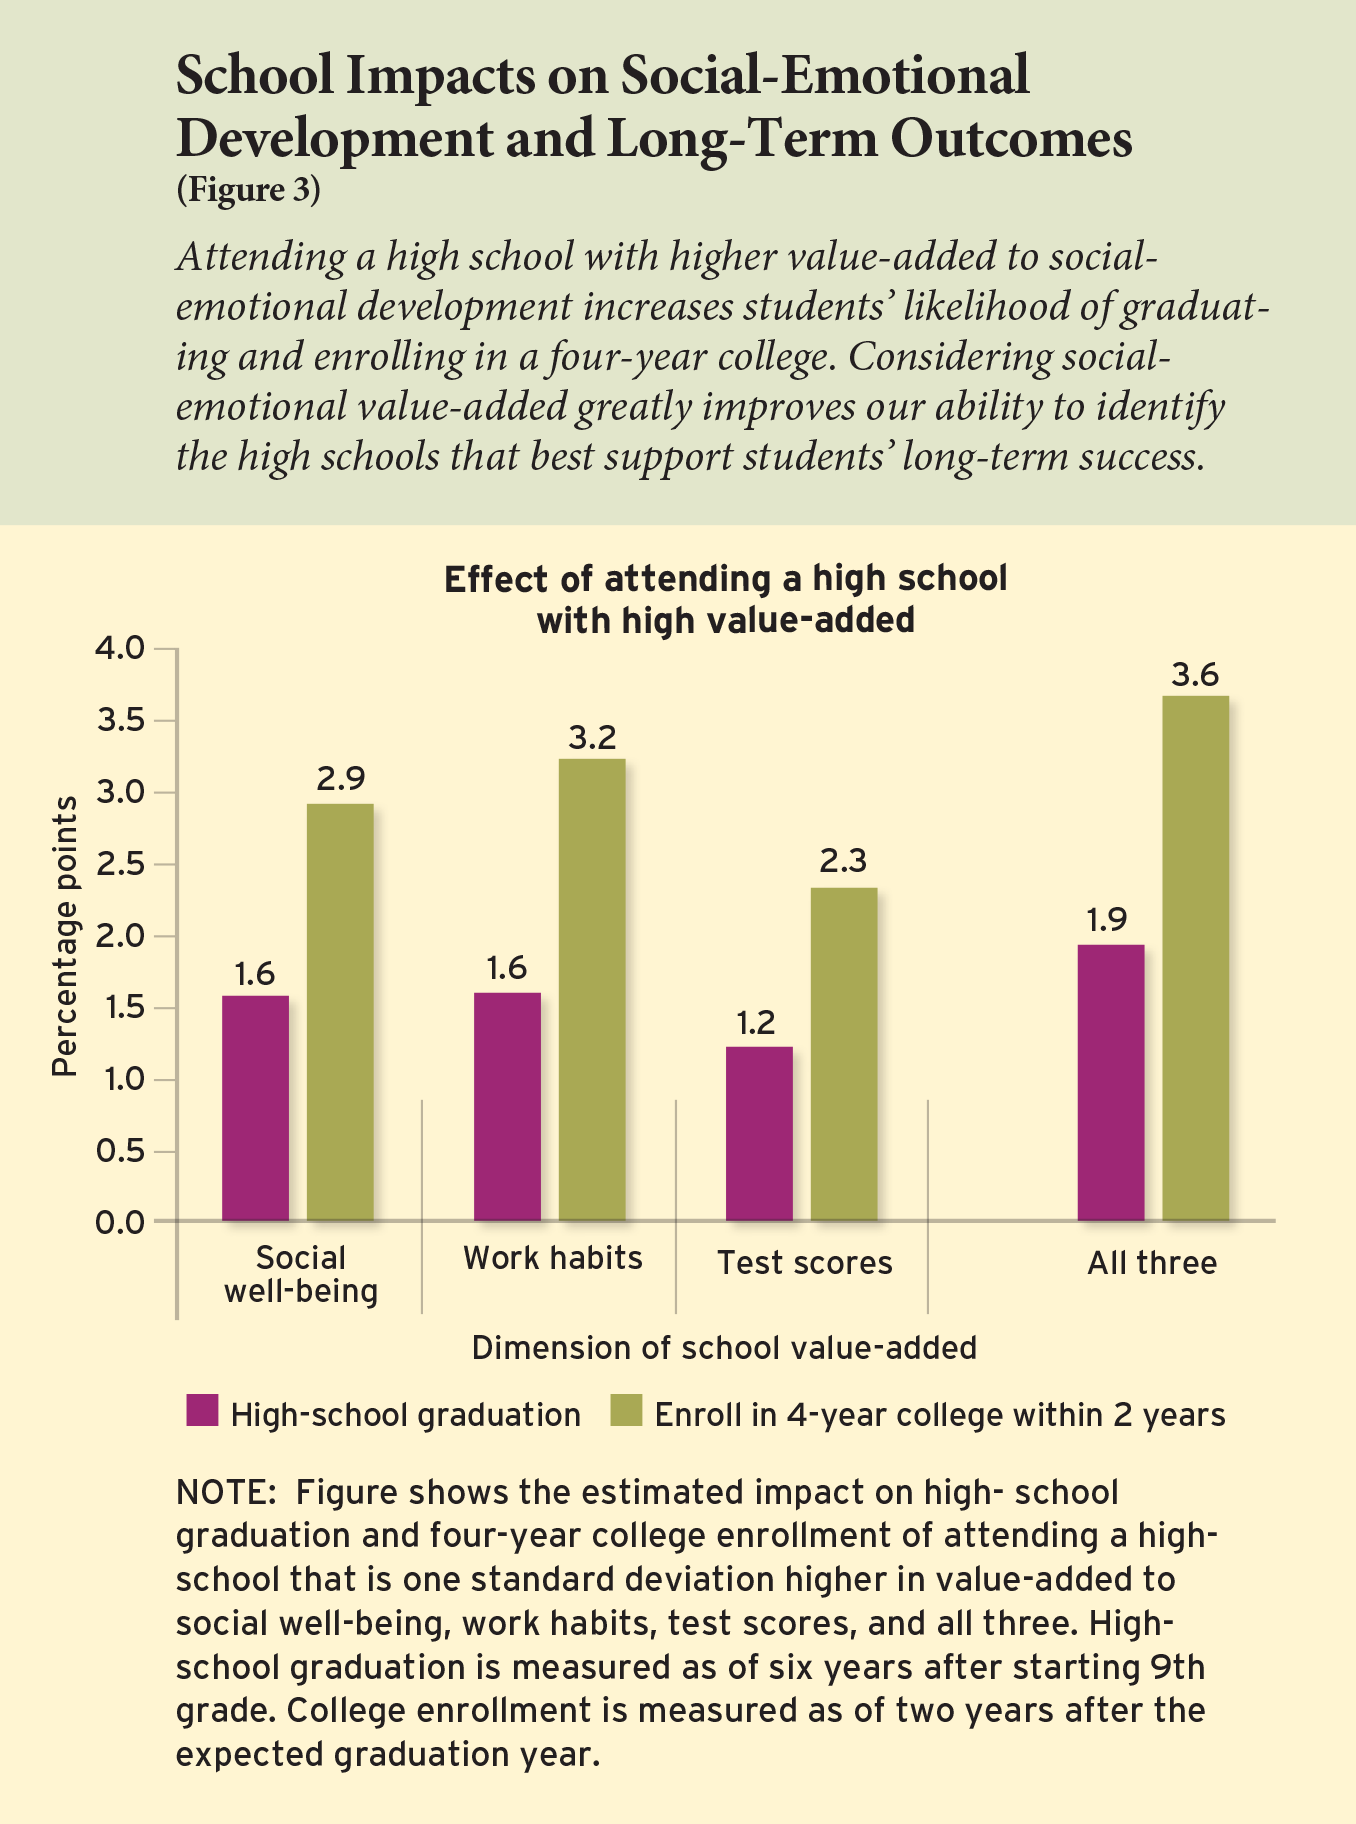 Figure 3: School Impacts on Social-Emotional Development and Long-Term Outcomes